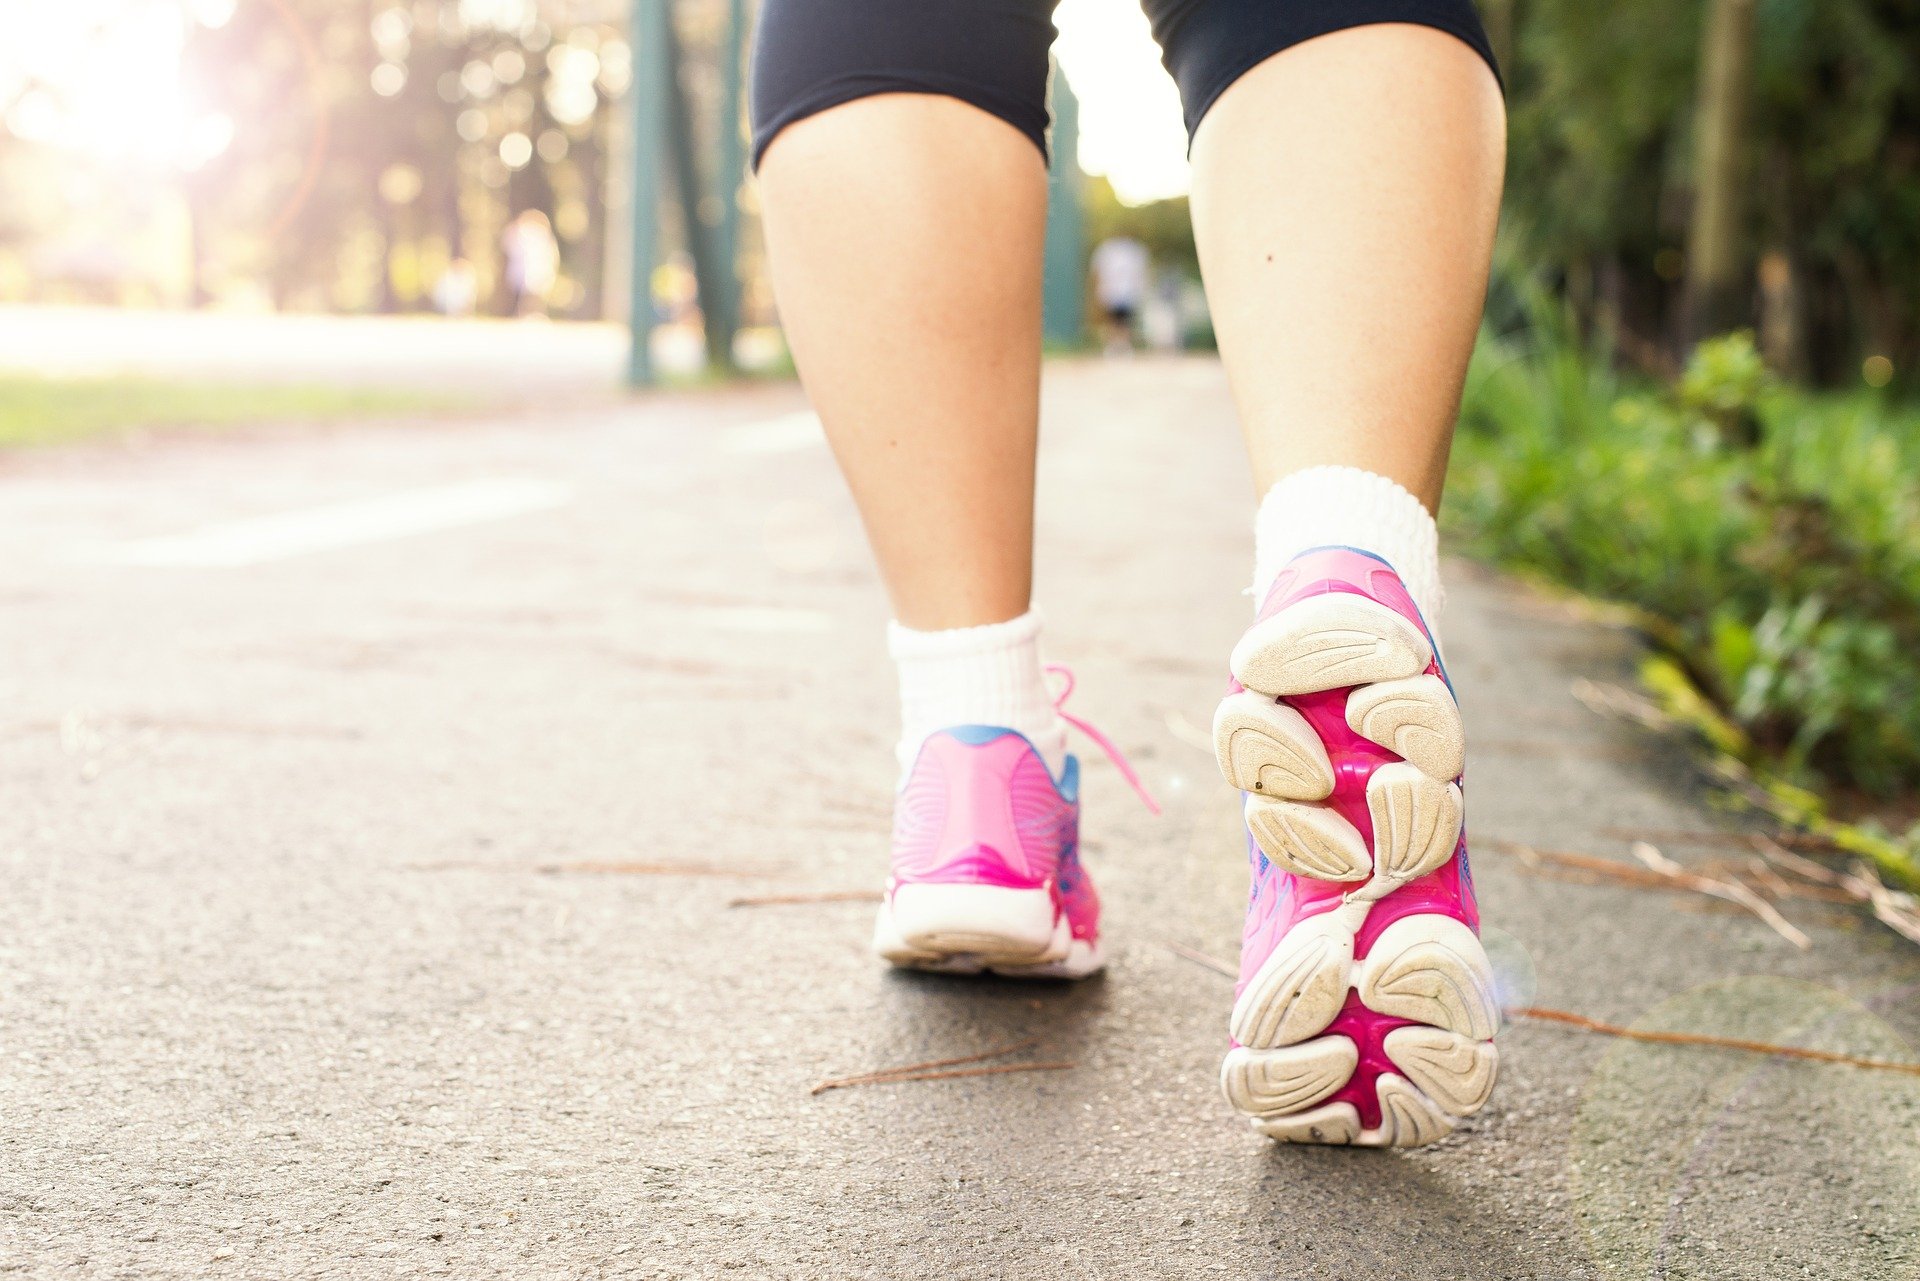 how to lose 2 pounds a week by walking